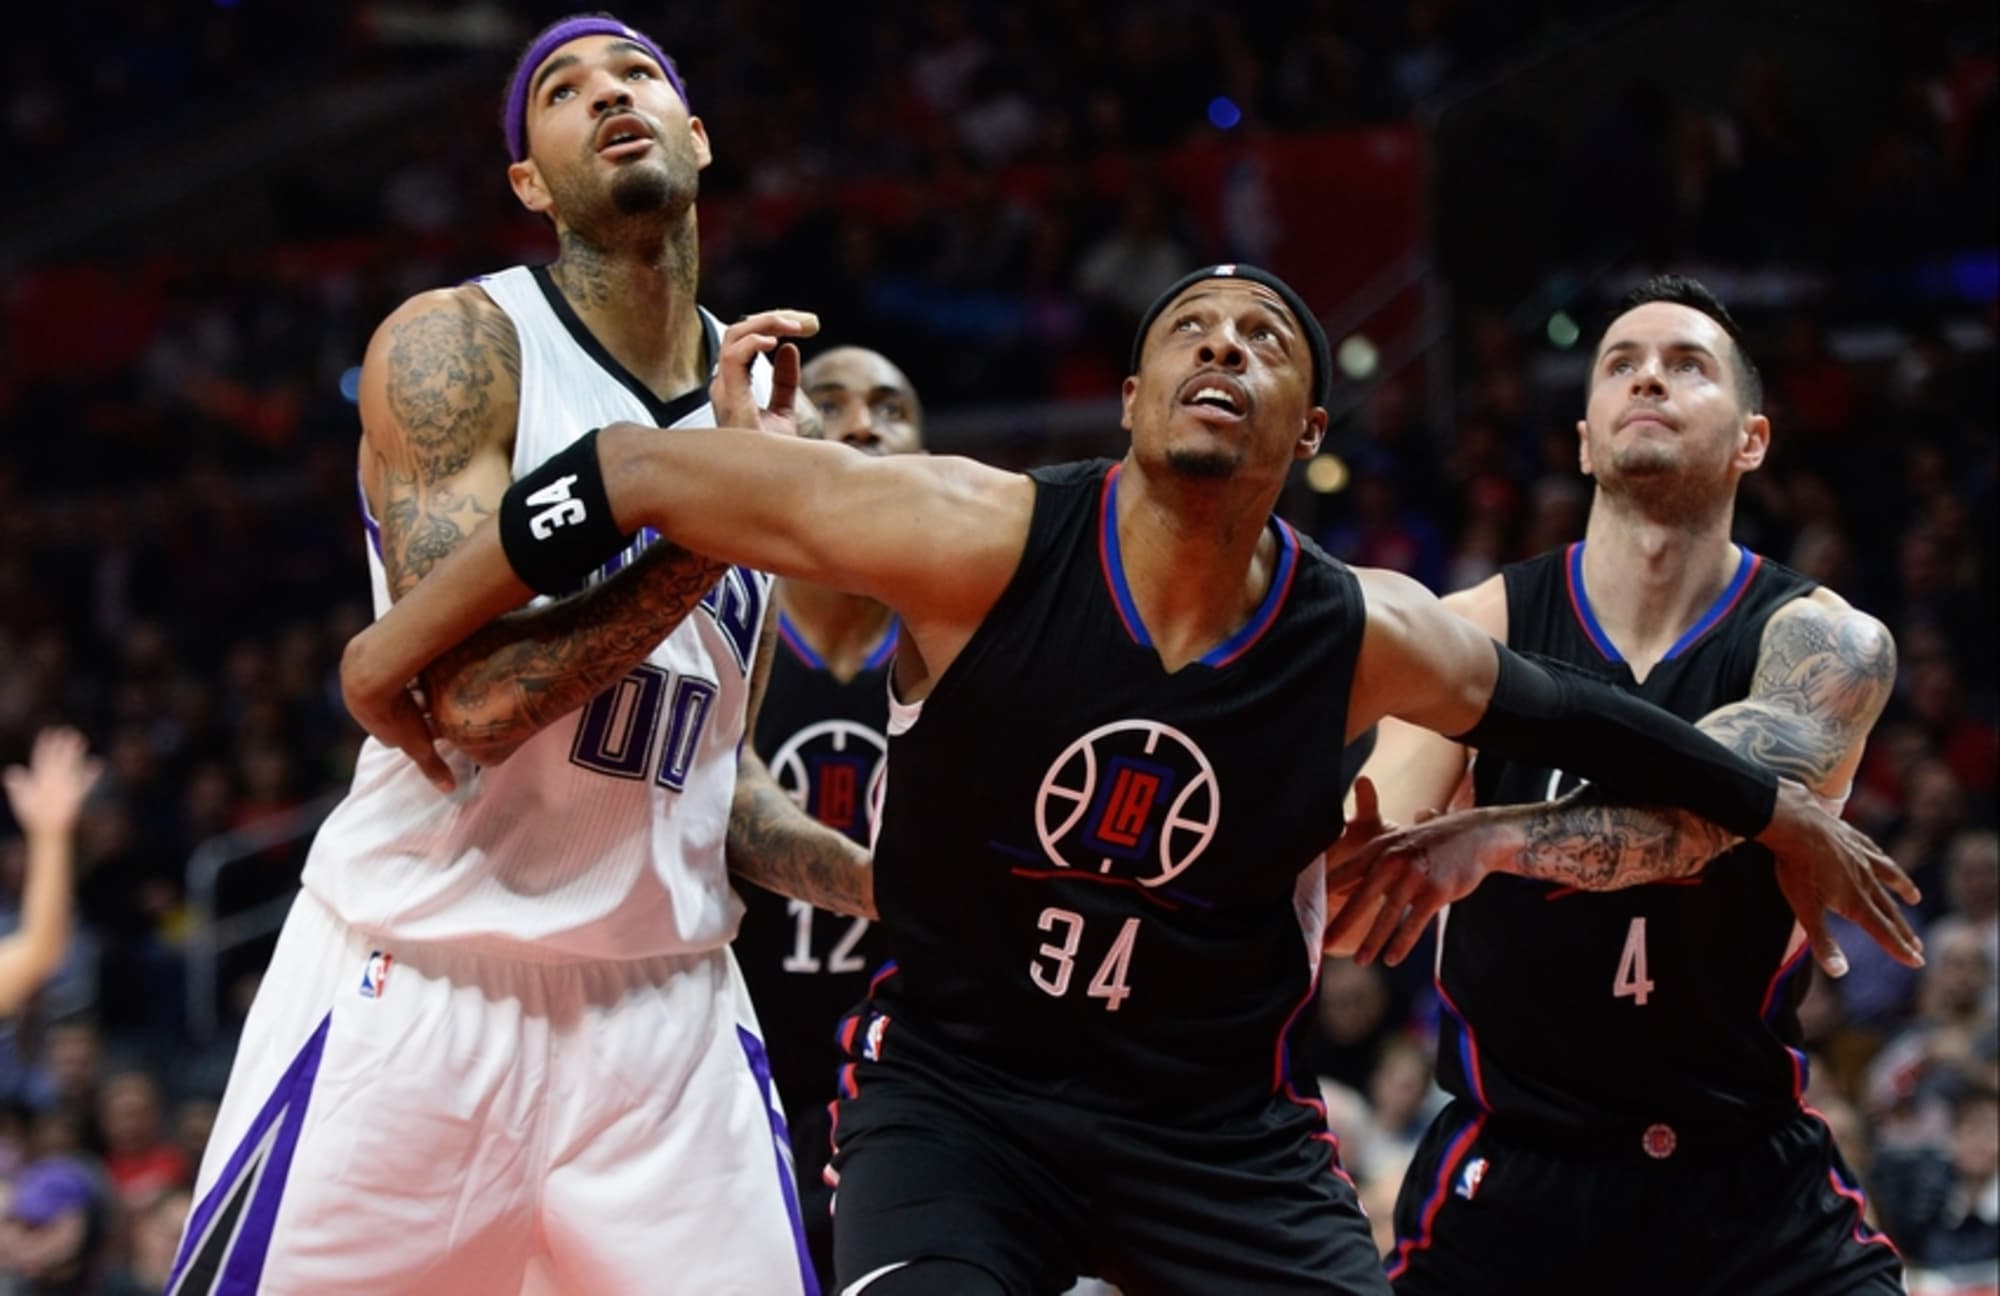 Paul Pierce Reportedly Waived by Clippers After Previously